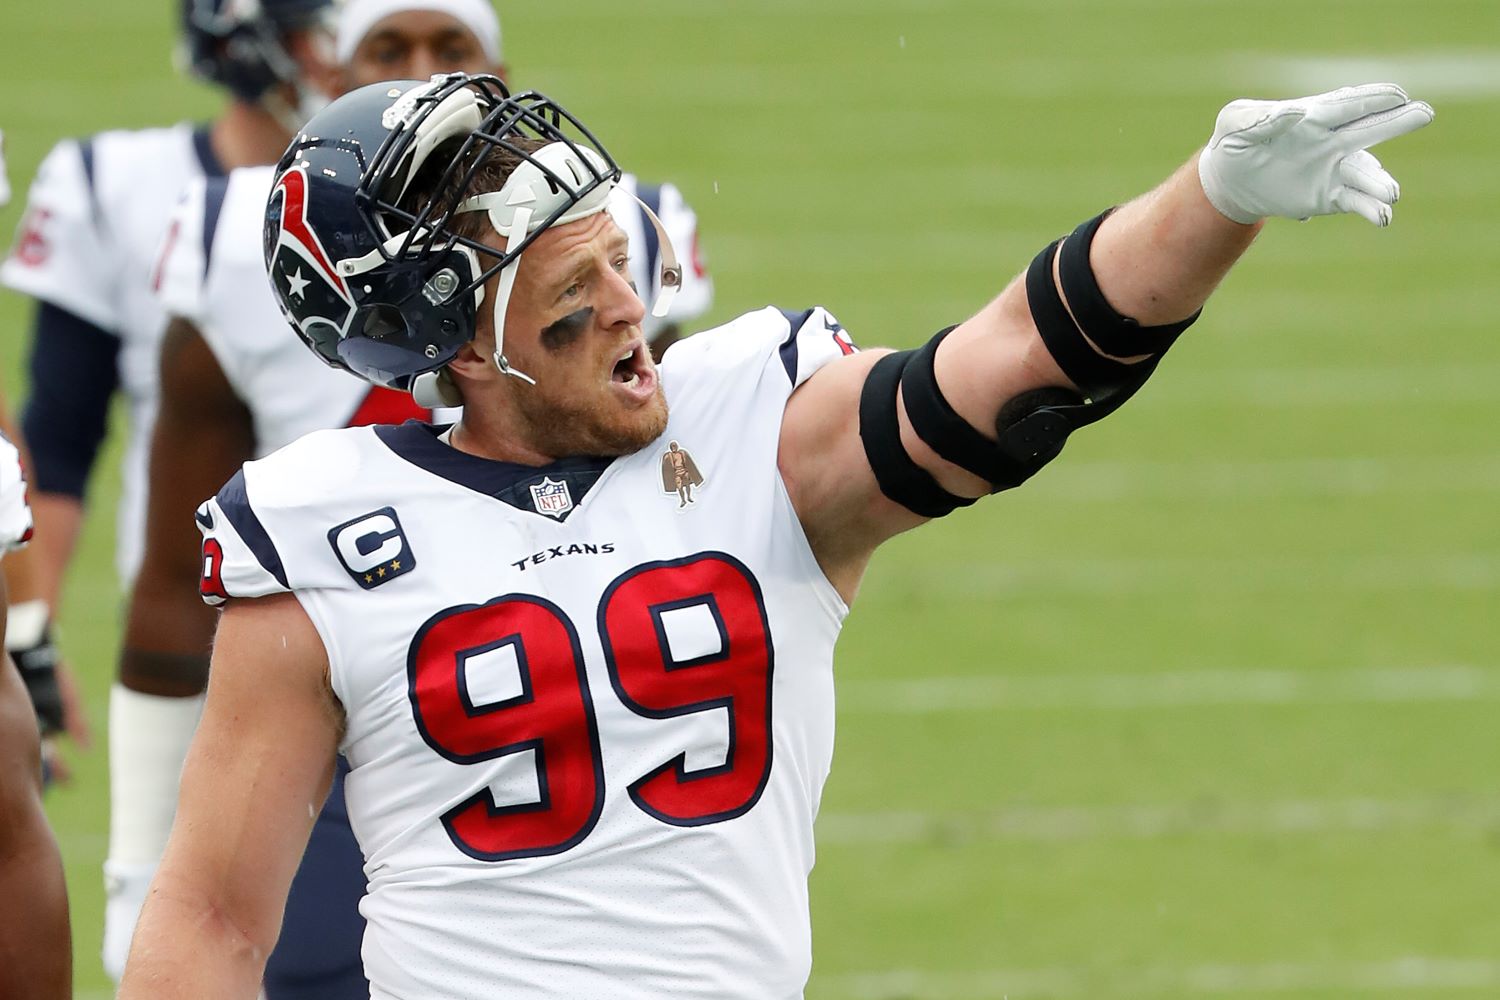 J.J. Watt just raised serious doubts about his future with the Texans. Will Houston trade the star defensive end this offseason?